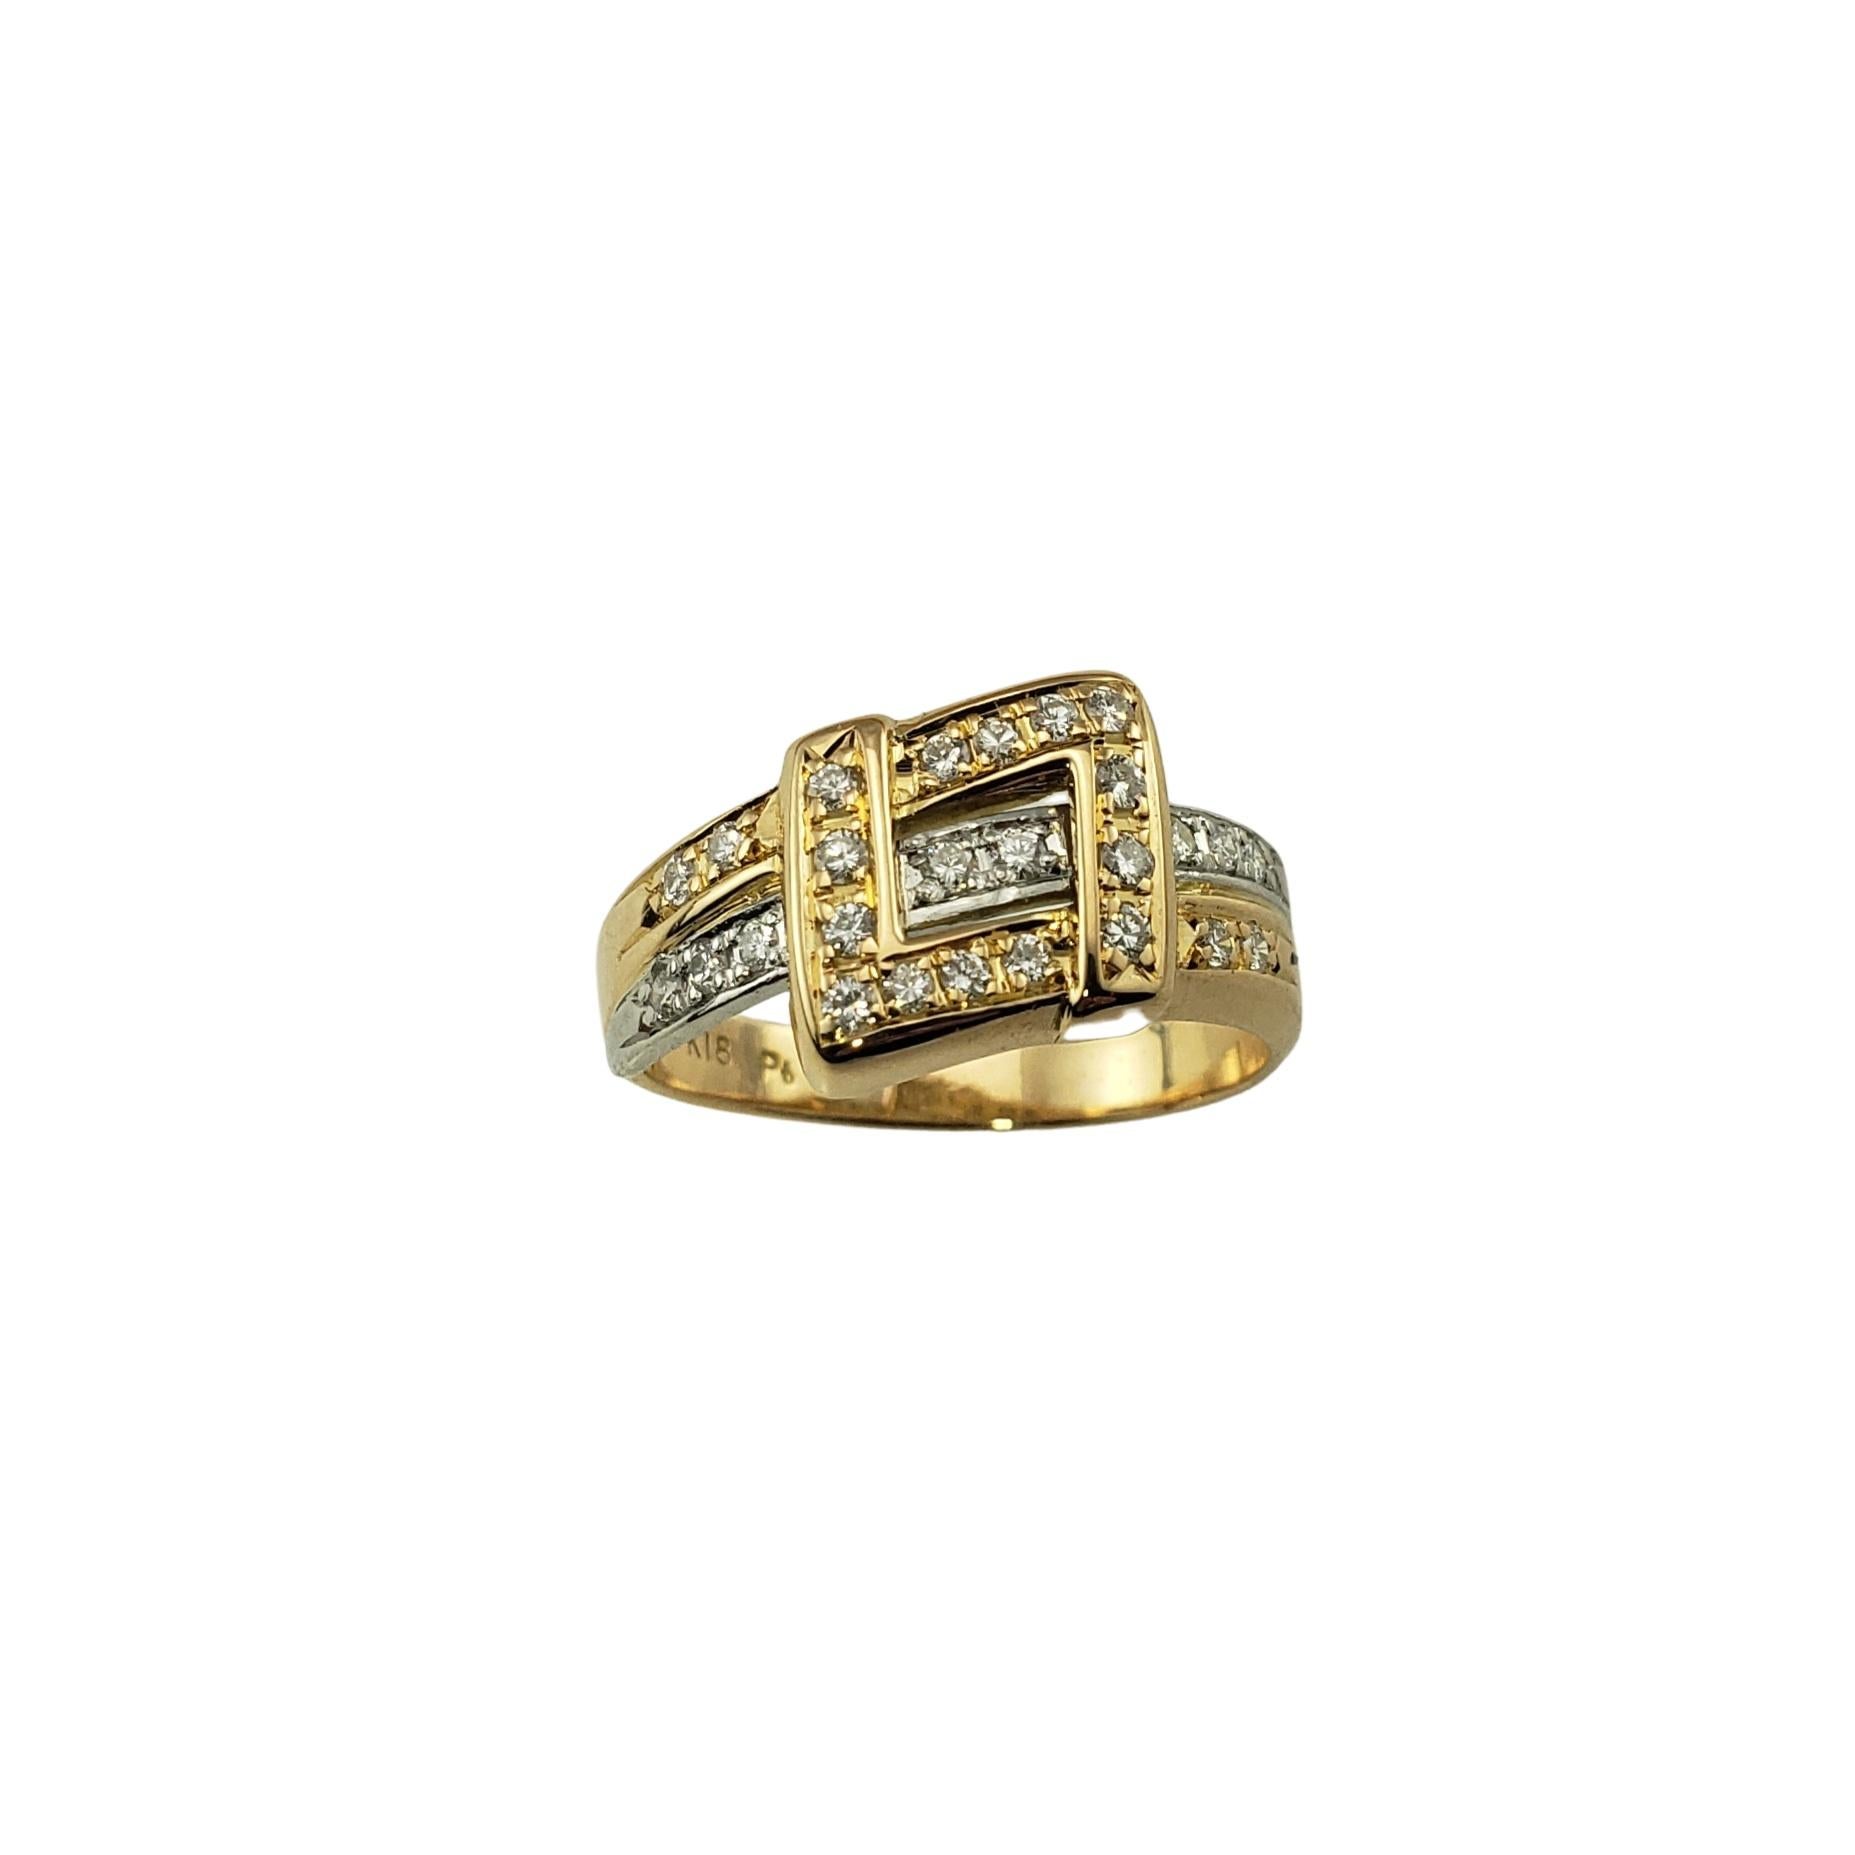 18 Karat Yellow/White Gold and Diamond Ring Size 7.25-

This stunning ring features 26 round brilliant cut diamonds set in beautifully detailed 18K yellow and white gold.  Width:  9 mm.
Shank:  3 mm.

Approximate total diamond weight:  .26